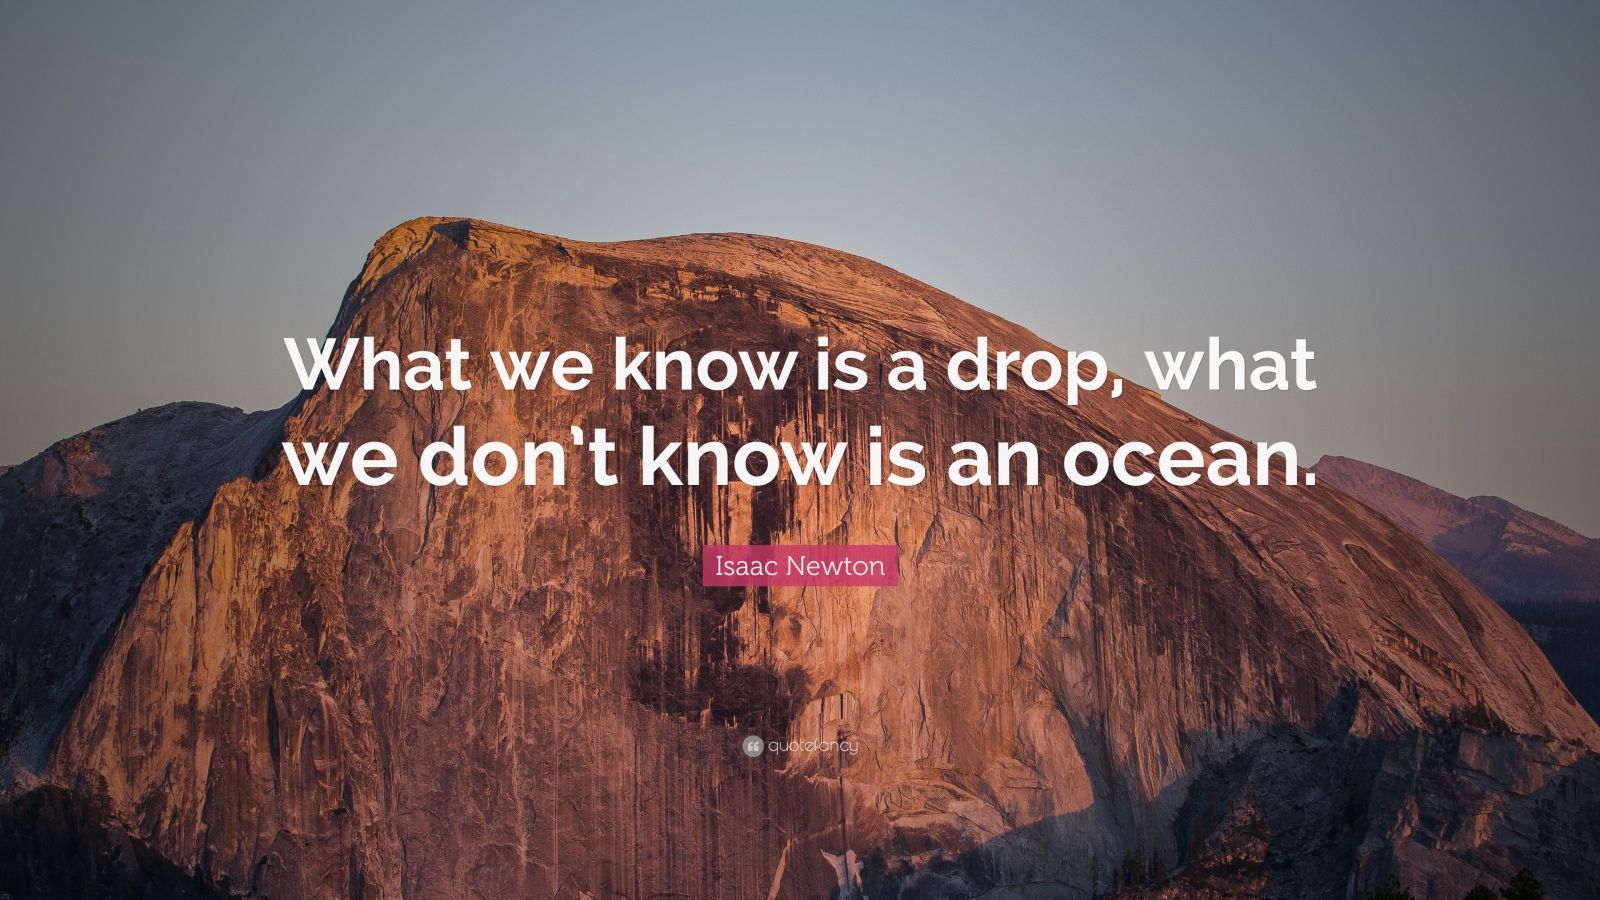 Isaac Newton Quote: "What we know is a drop, what we don't know is an ocean." (21 wallpapers ...